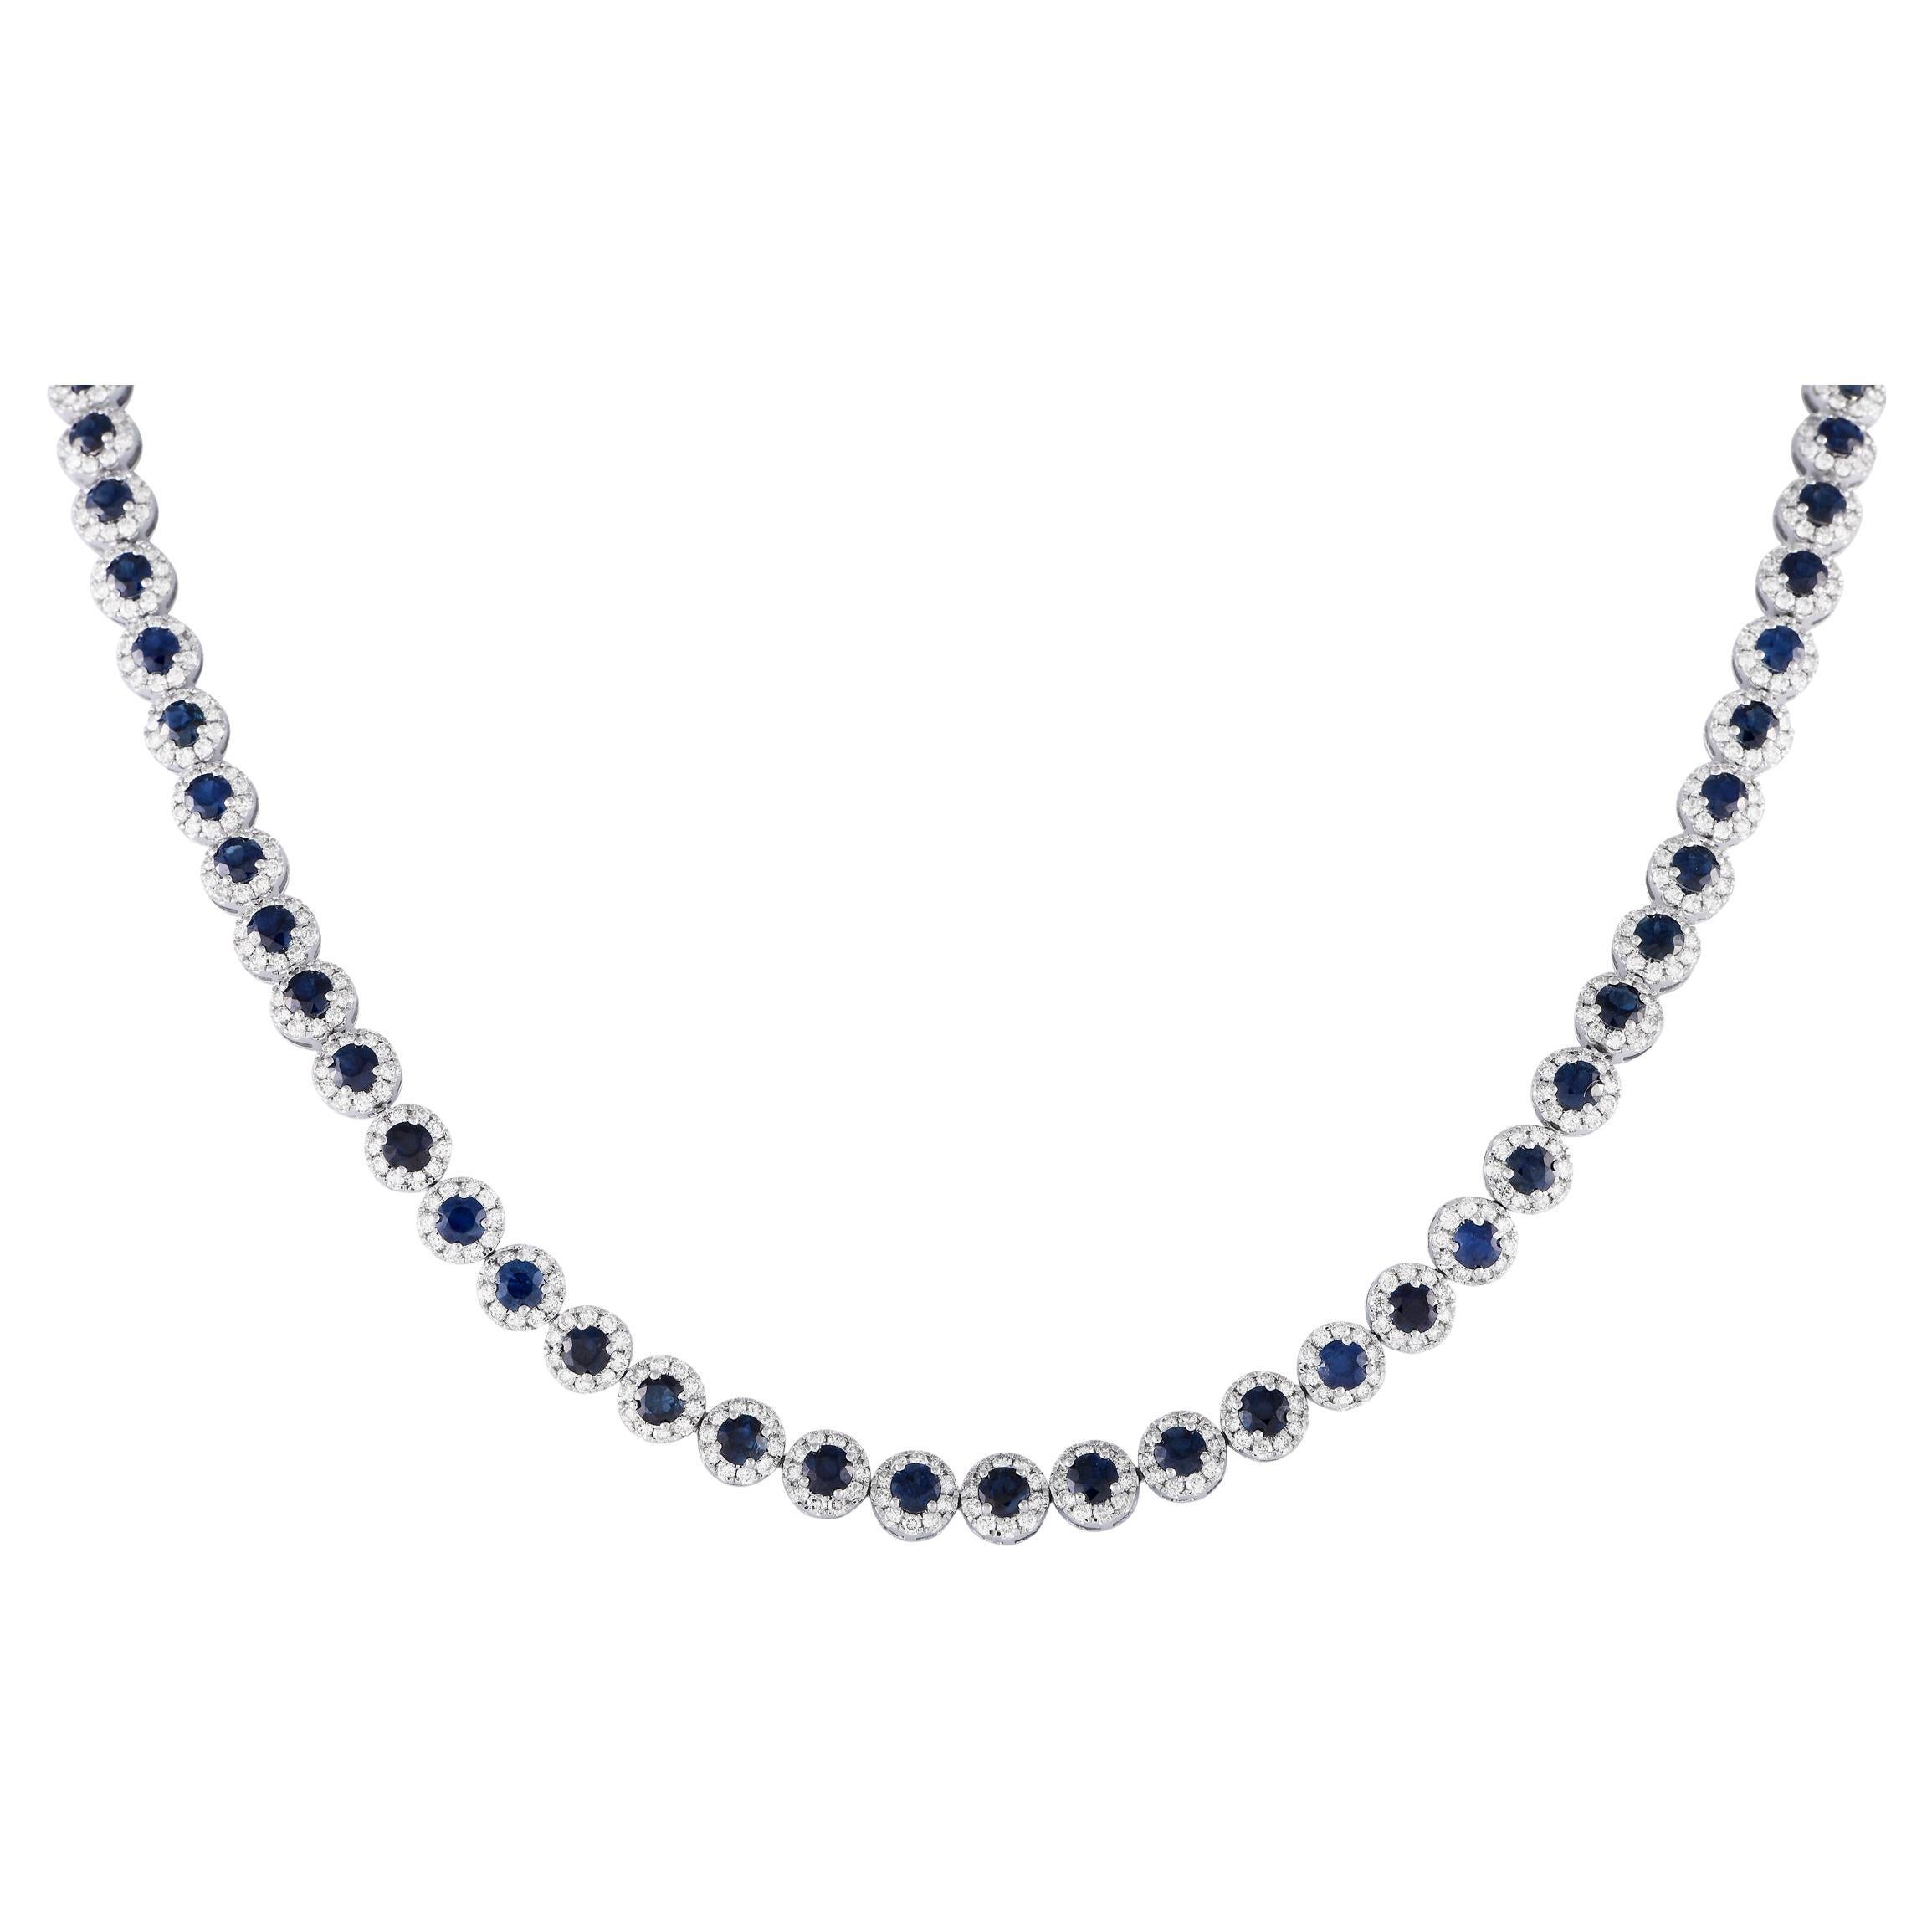 LB Exclusive 14k White Gold 8.15 Carat Diamond and Sapphire Necklace For Sale